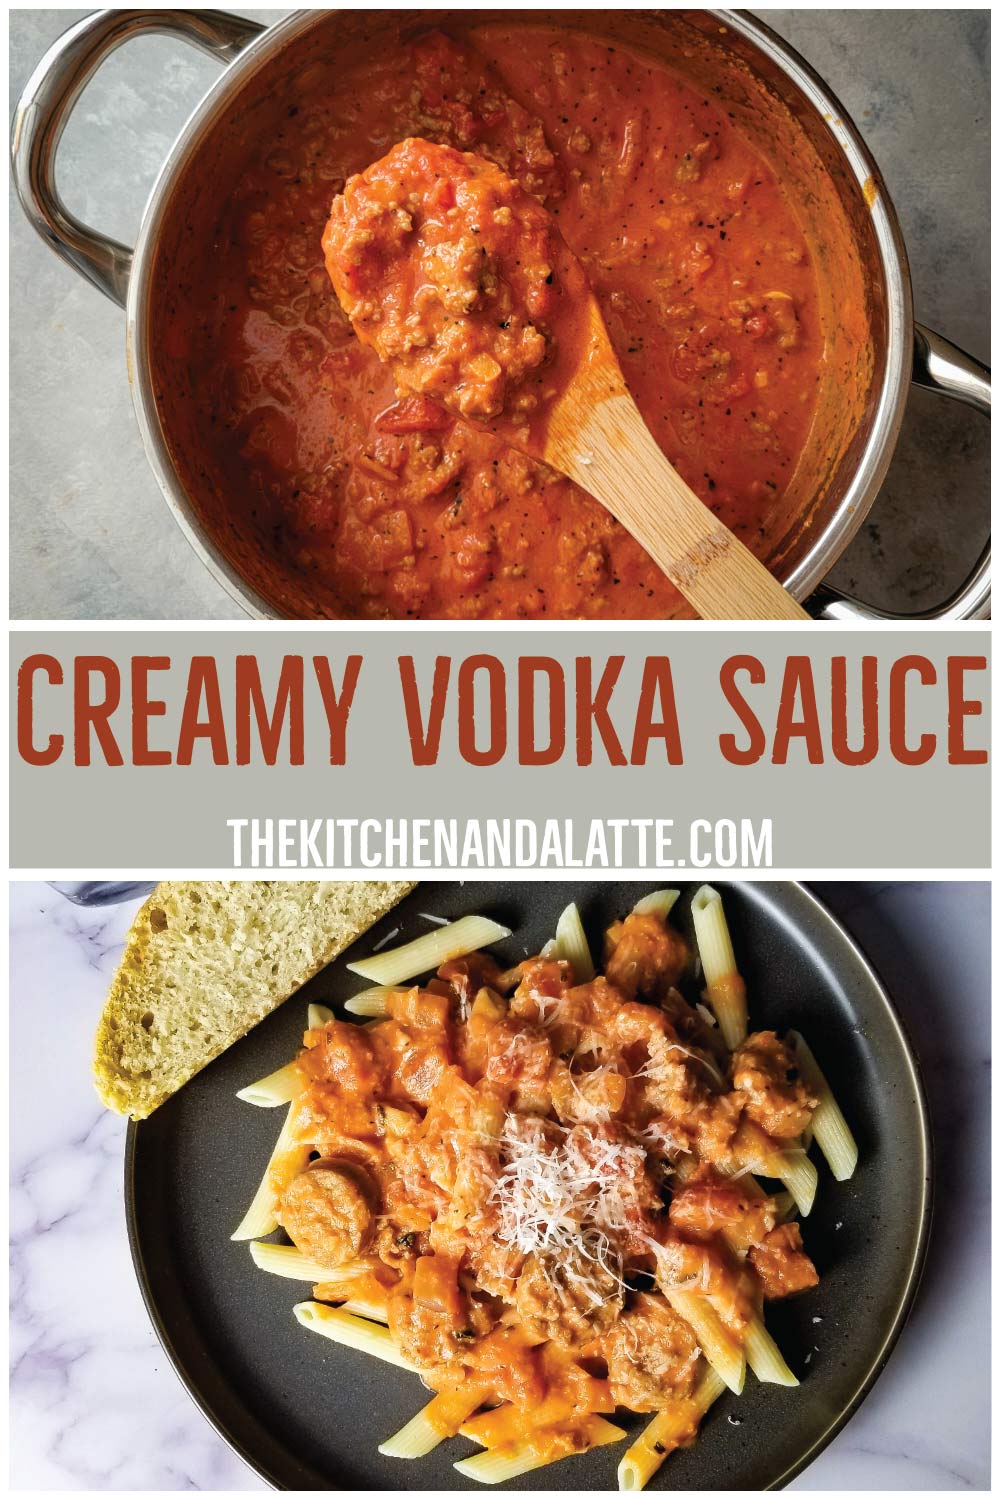 Creamy vodka sauce Pinterest graphic. Vodka sauce with sausage in a saucepot being spooned out and penne pasta on a plate with the sauce on top with a slice of Italian bread on the side.